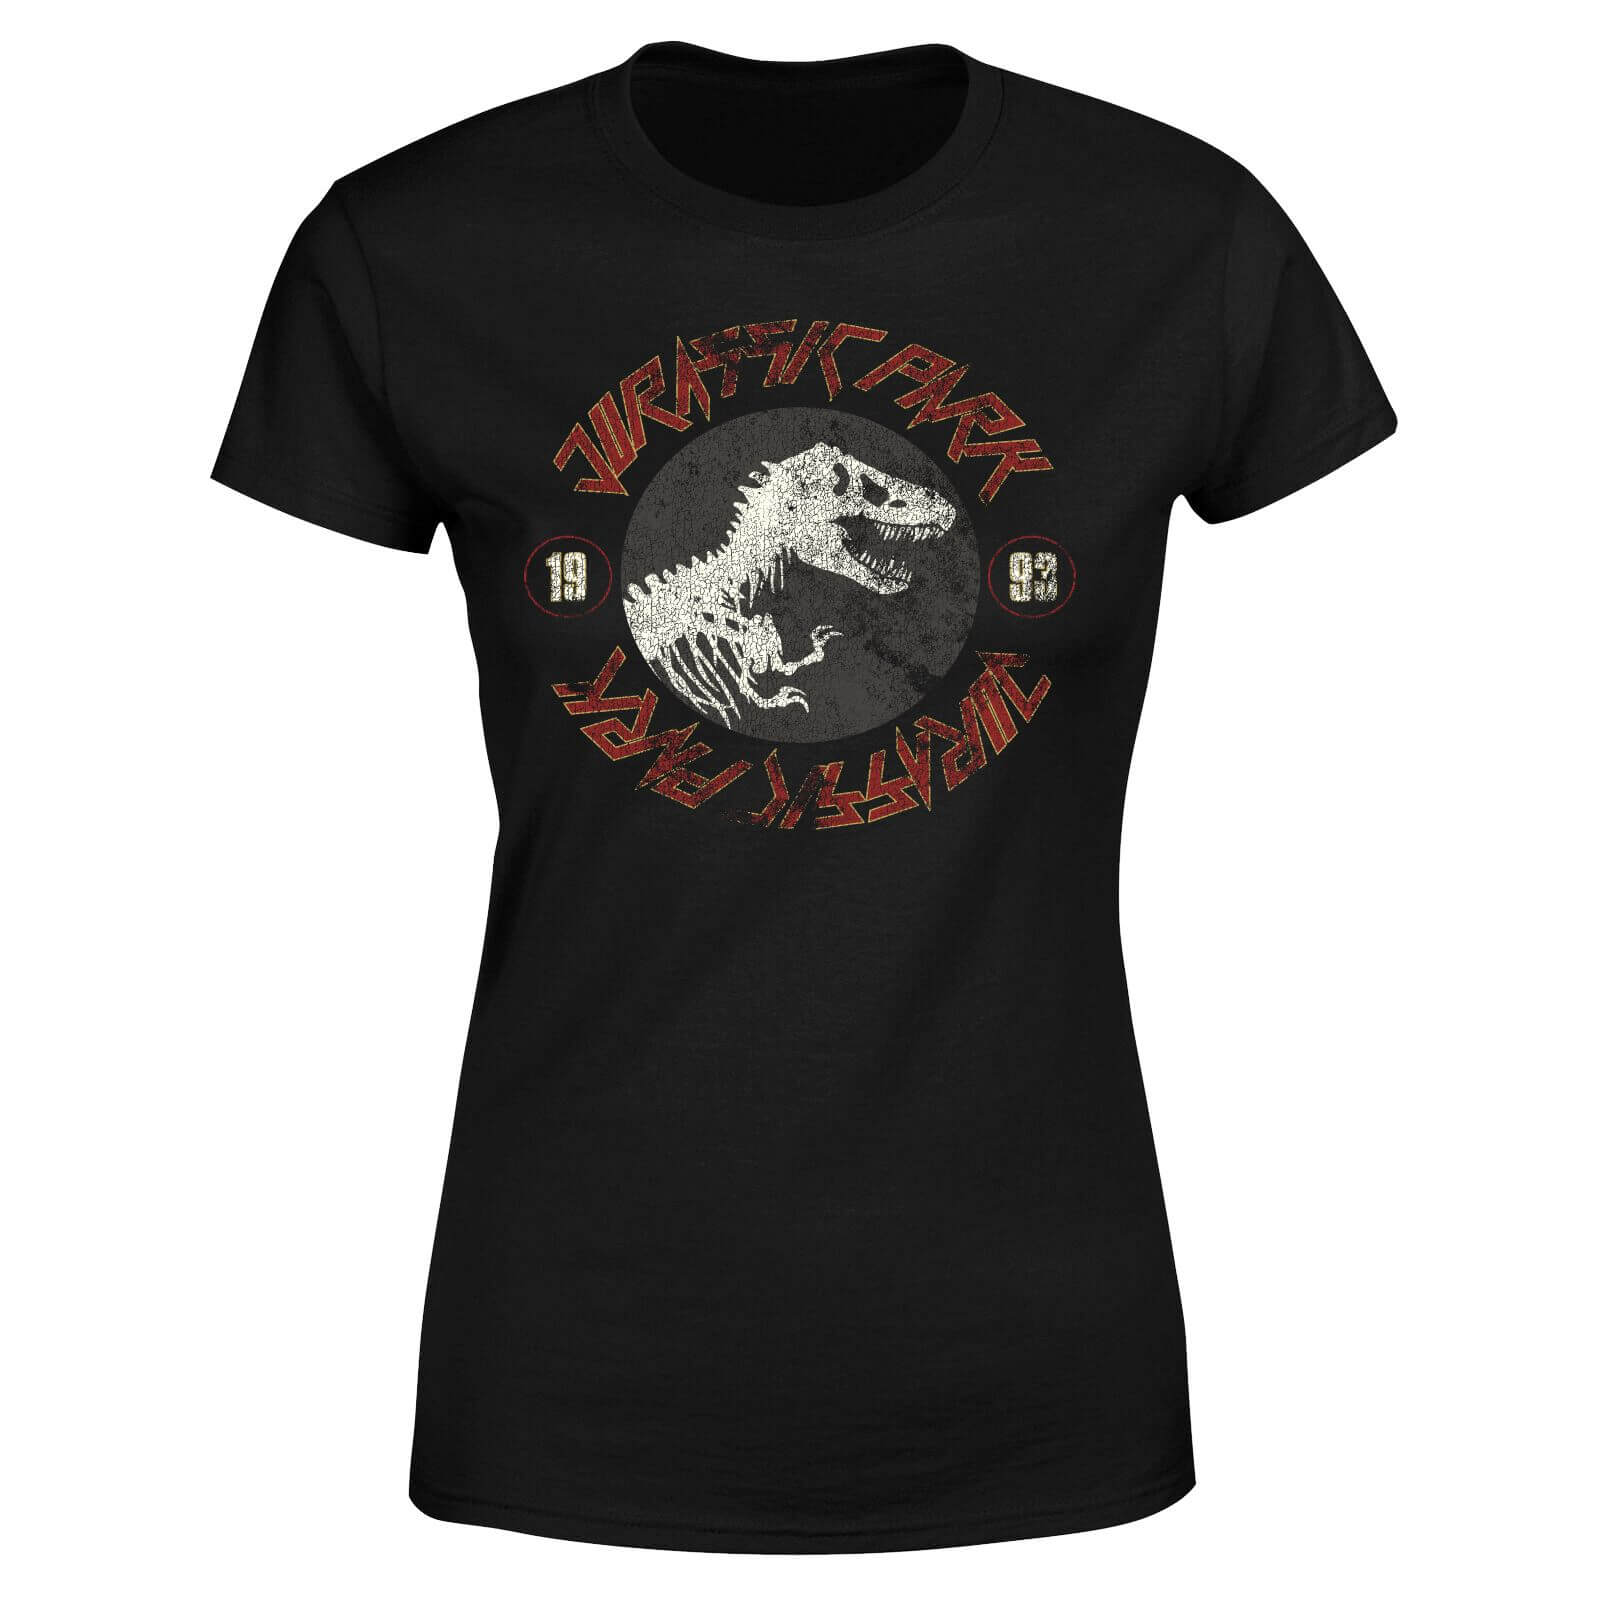 View the best prices for: jurassic park classic twist womens t-shirt